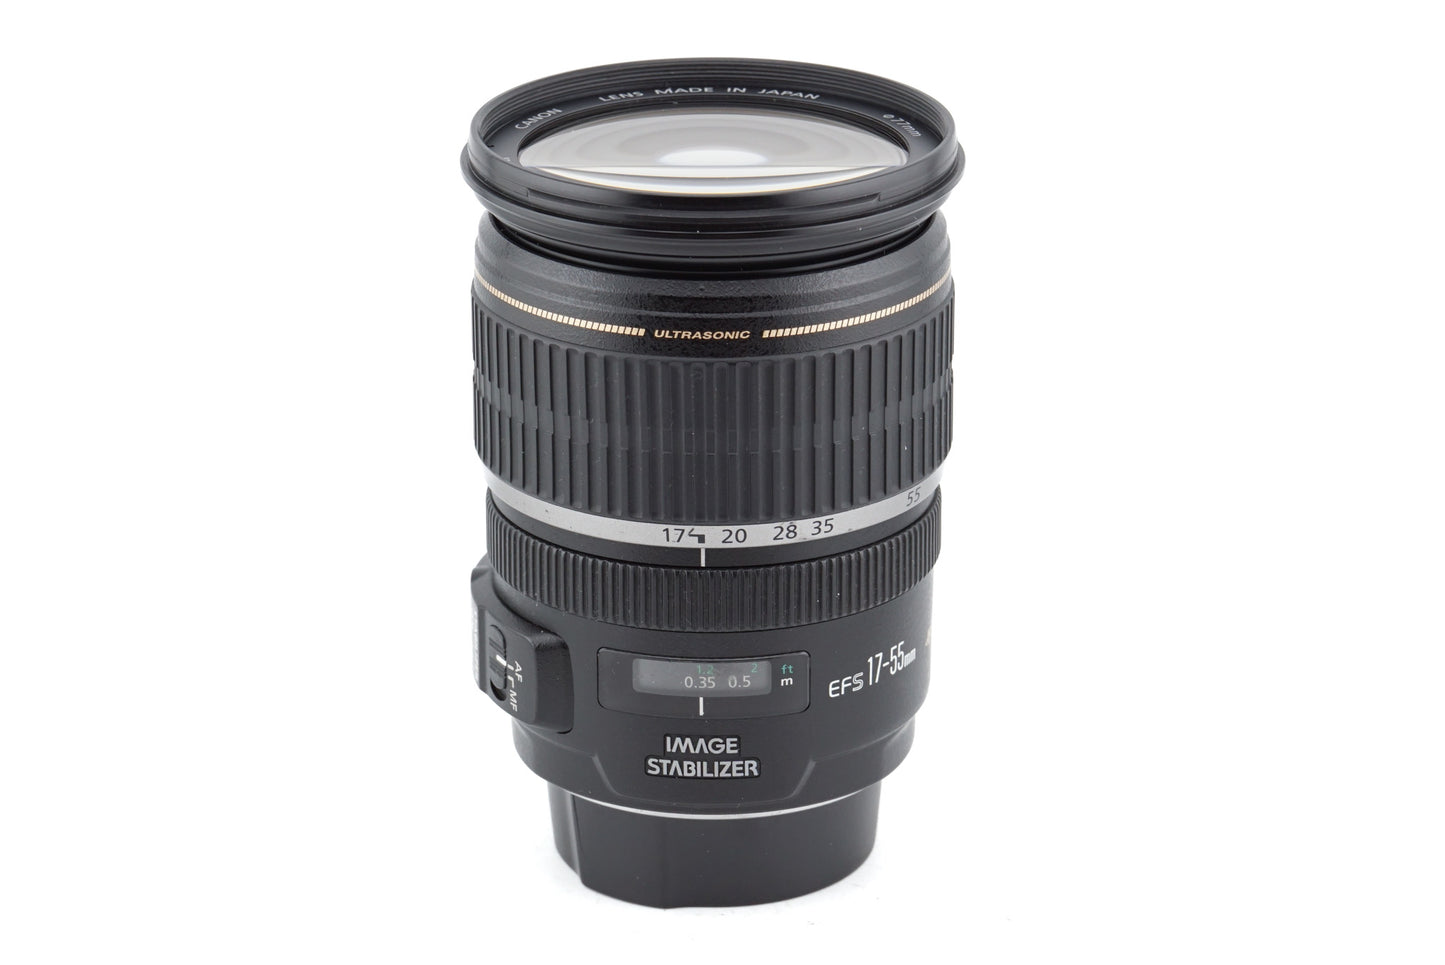 Canon 17-55mm f2.8 IS USM - Lens